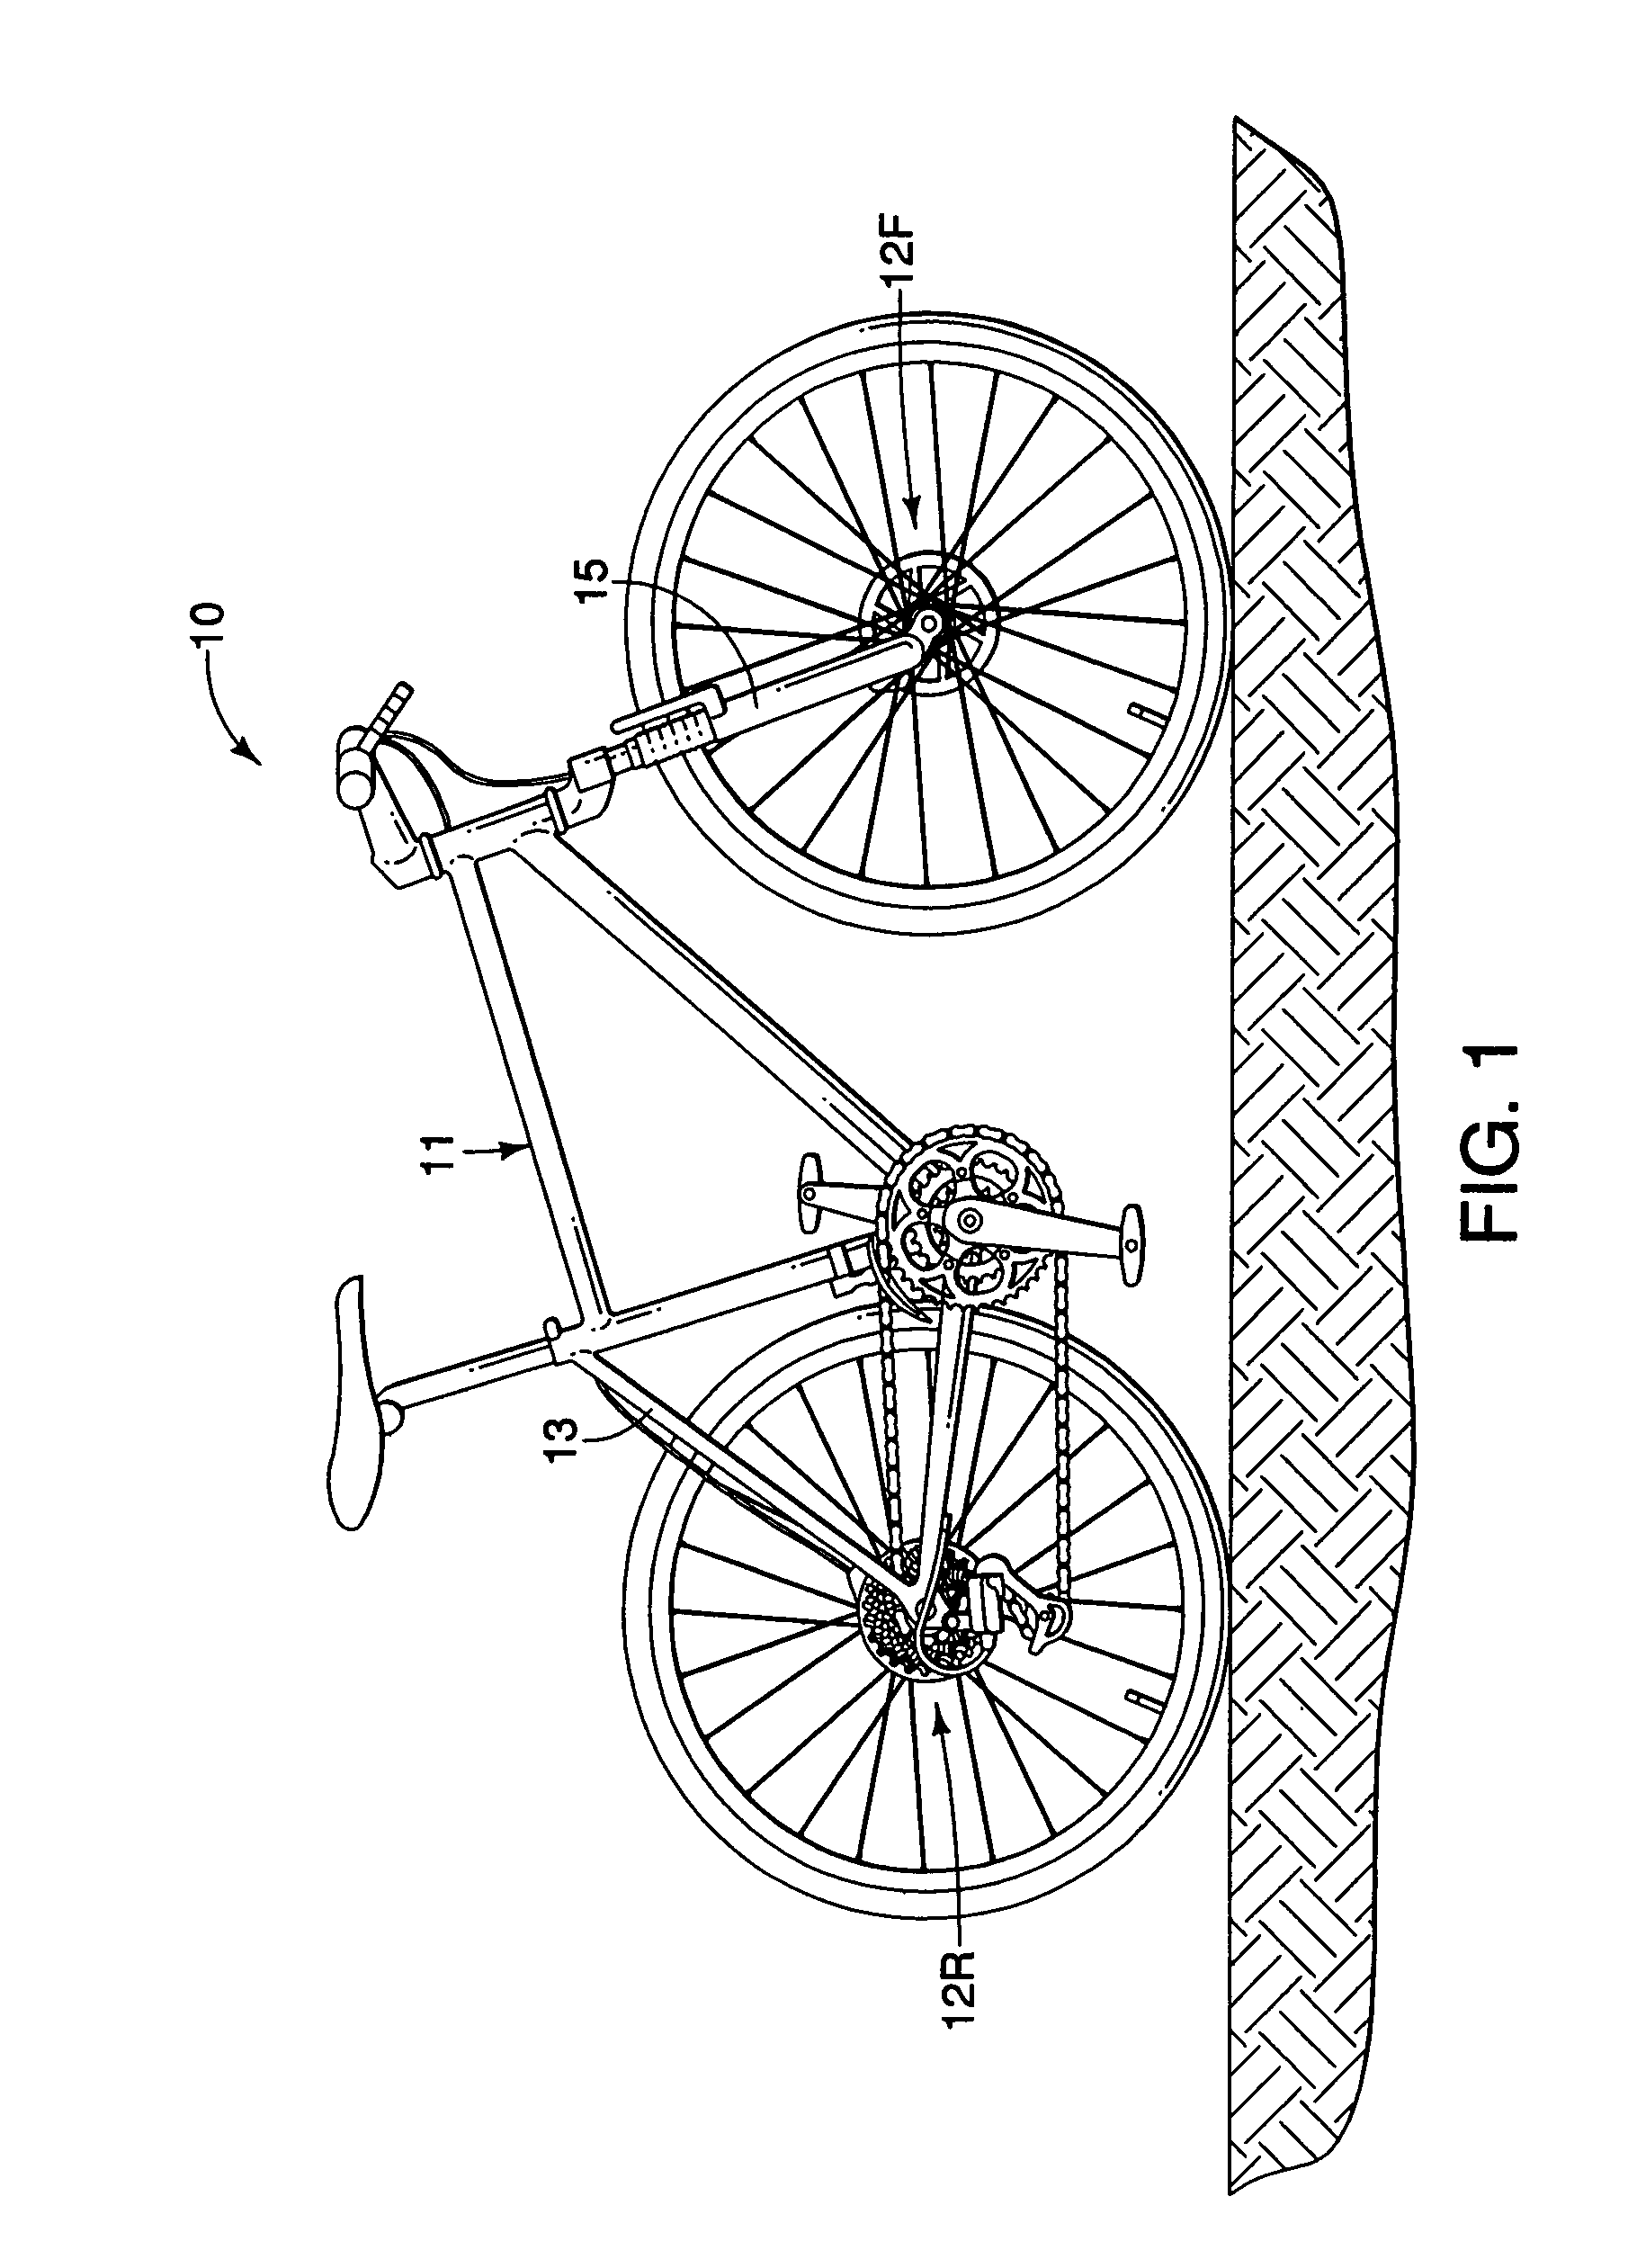 Bicycle wheel securing structure